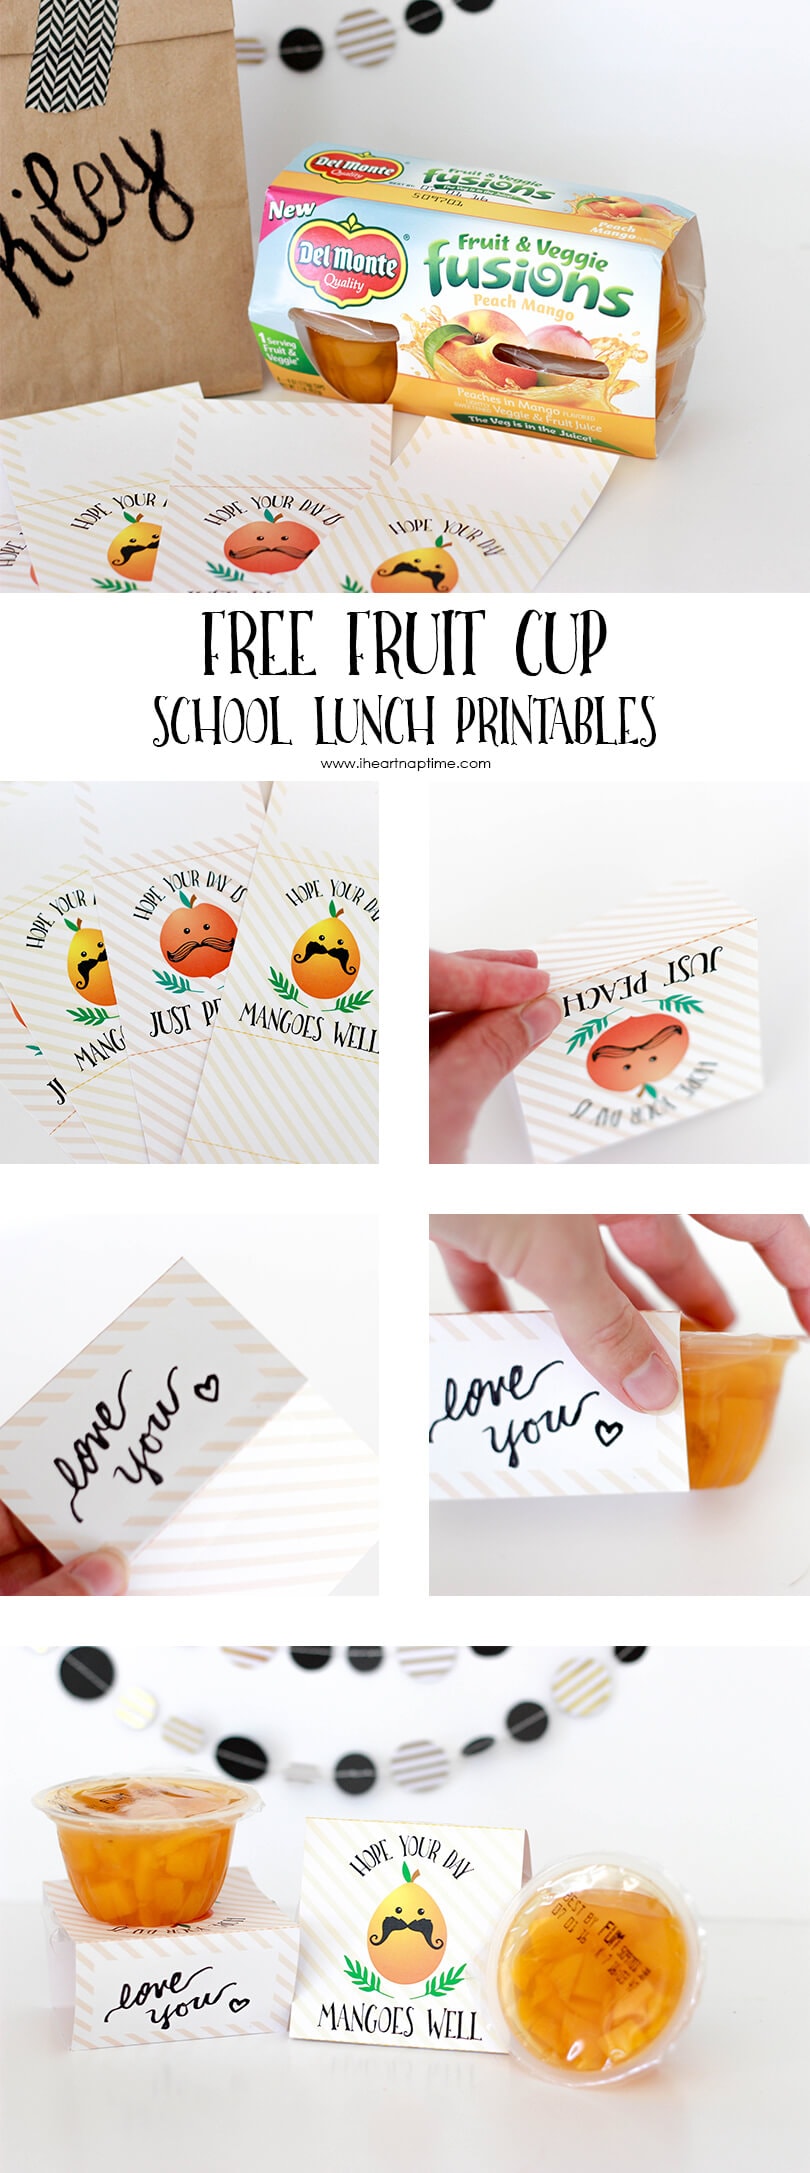 FREE Fruit Cup School Lunch Printables on iheartnaptime.com